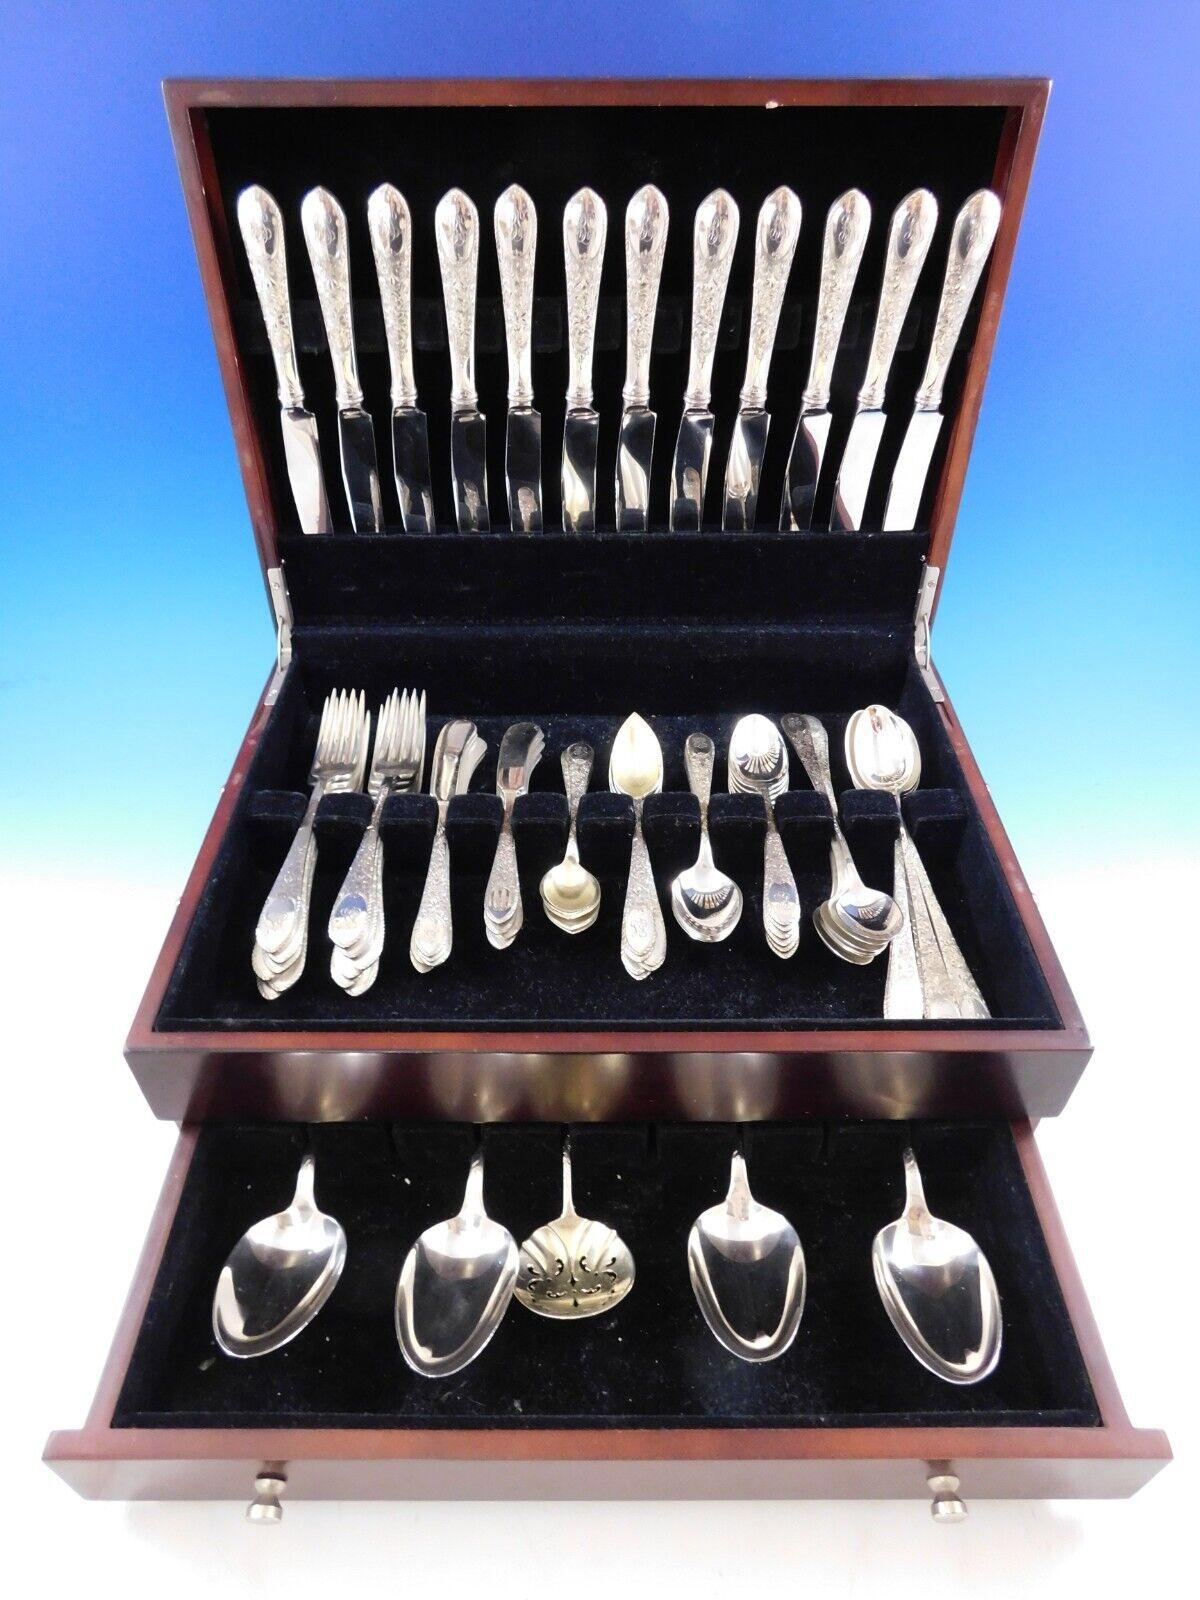 Scarce Elmwood by Gorham sterling silver Flatware set introduced in the year 1894, with engraved design - 77 pieces. This set includes:

12 Knives, 9